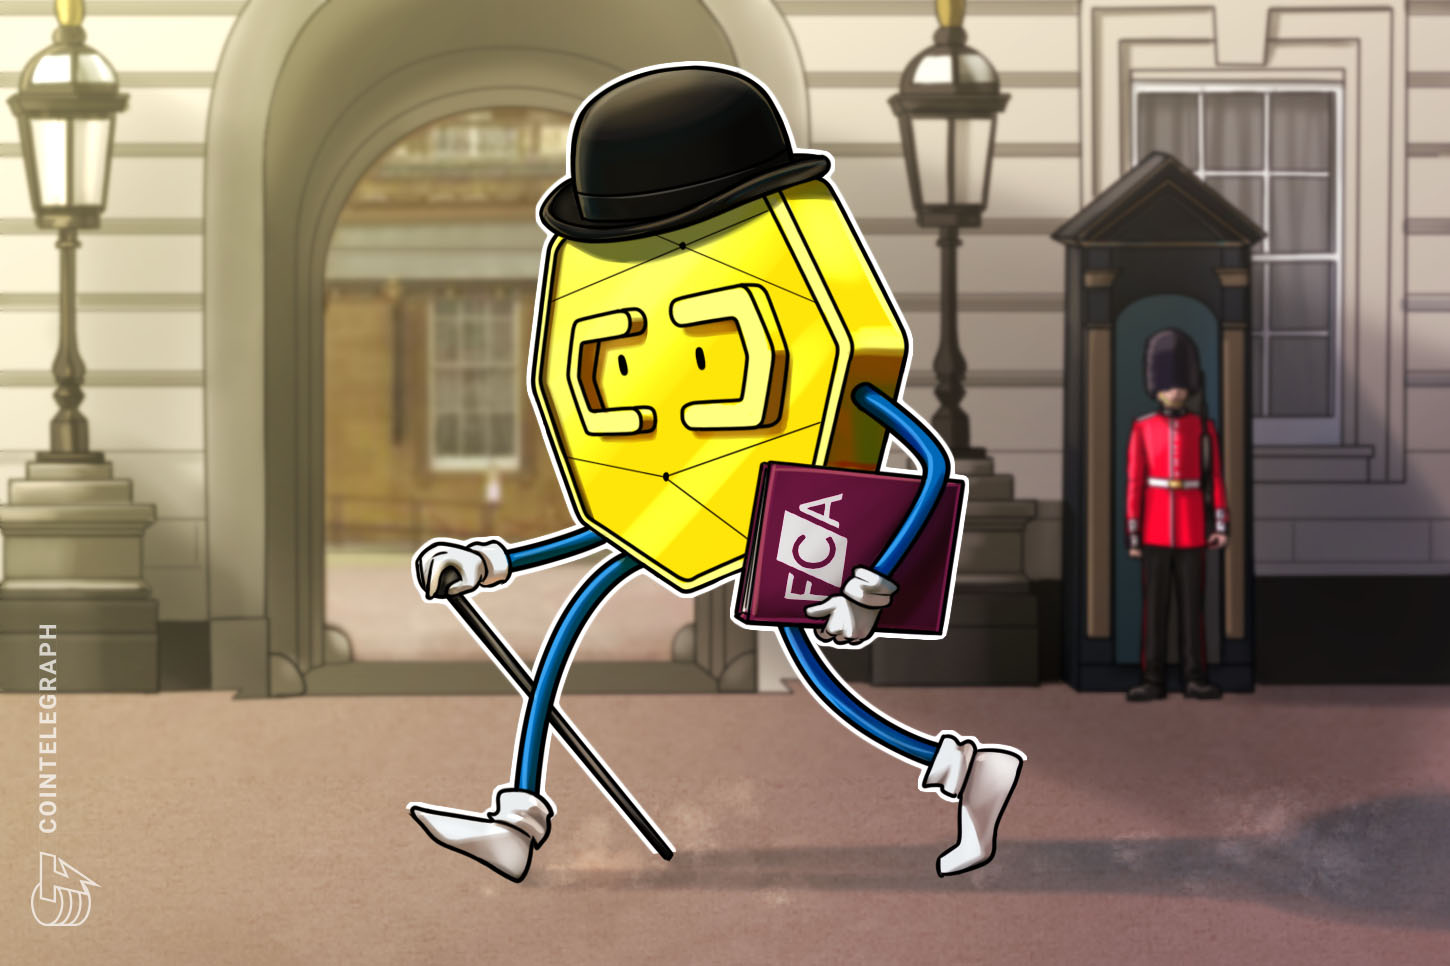 UK’s FCA bans retail crypto derivatives after year-long consideration